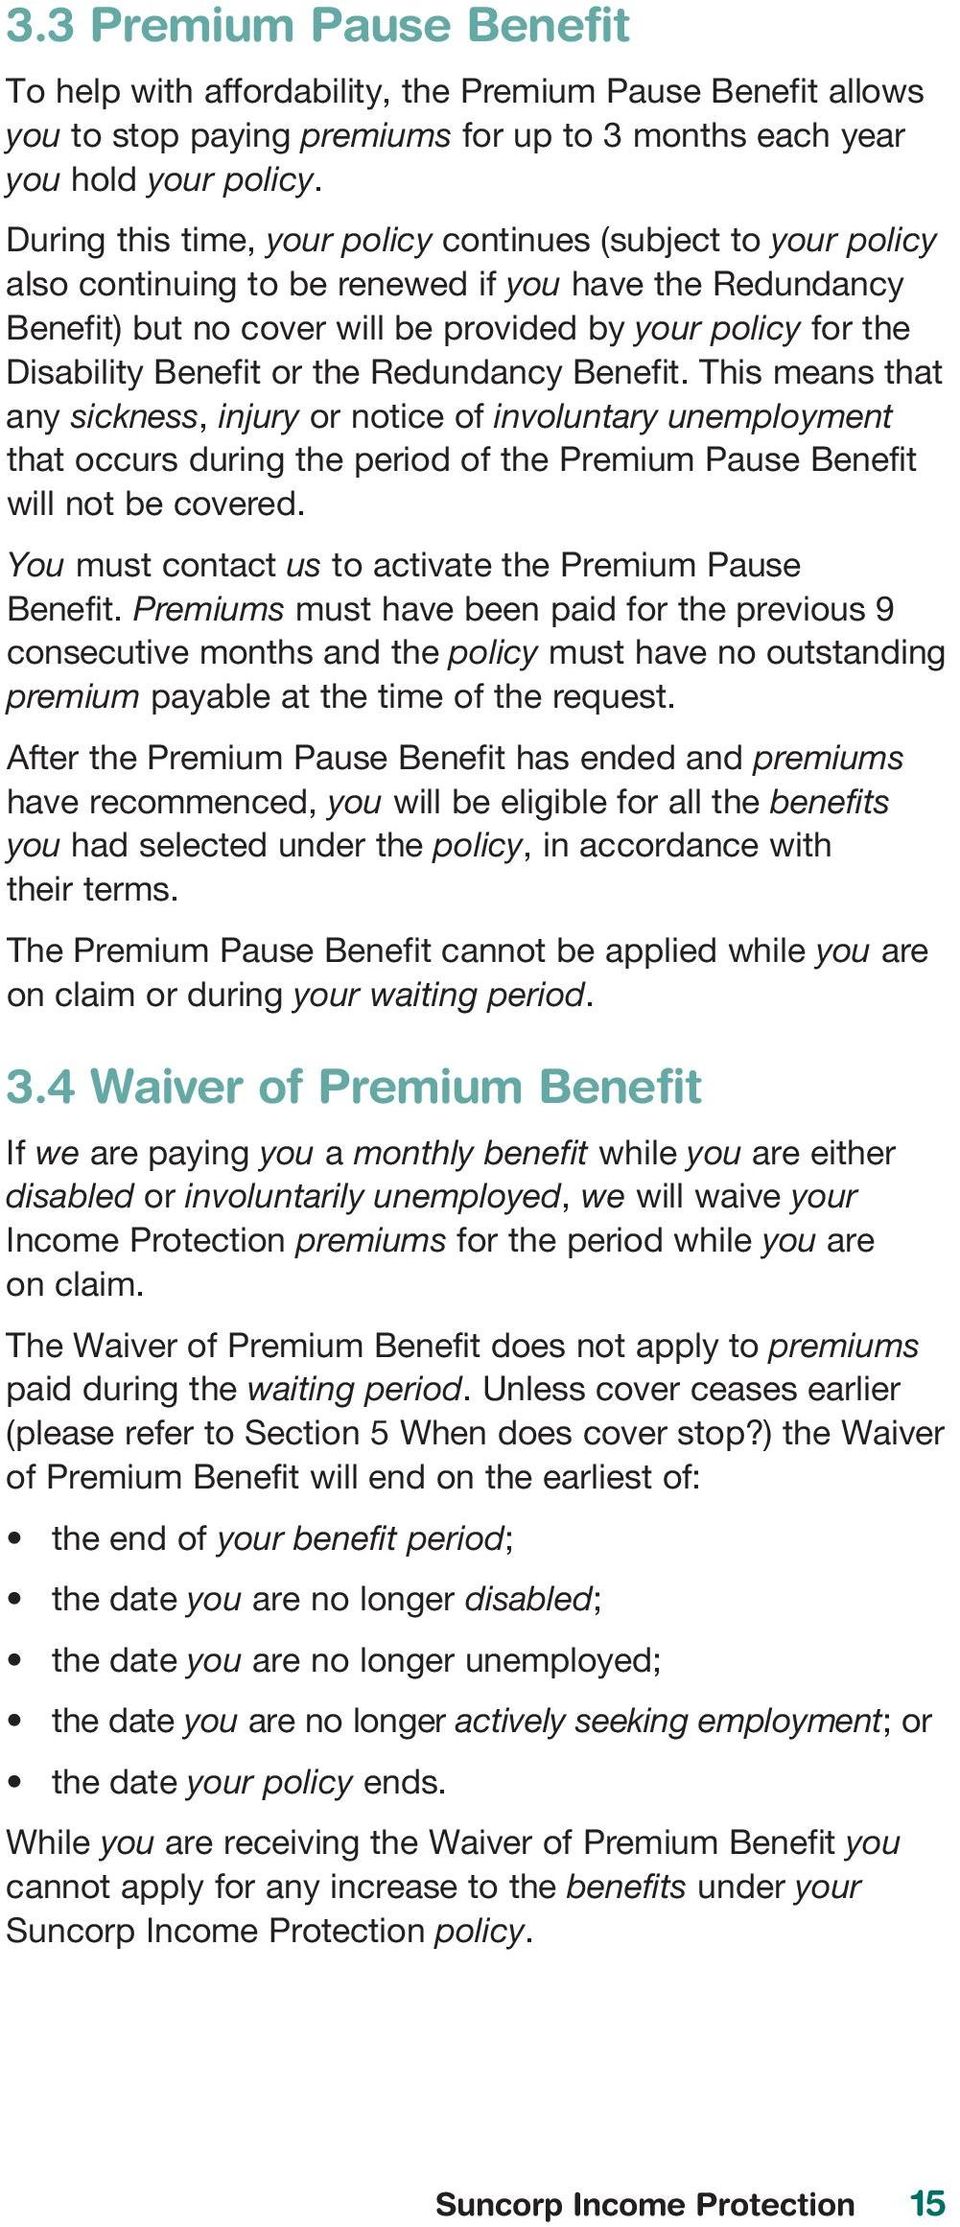 Benefit or the Redundancy Benefit. This means that any sickness, injury or notice of involuntary unemployment that occurs during the period of the Premium Pause Benefit will not be covered.